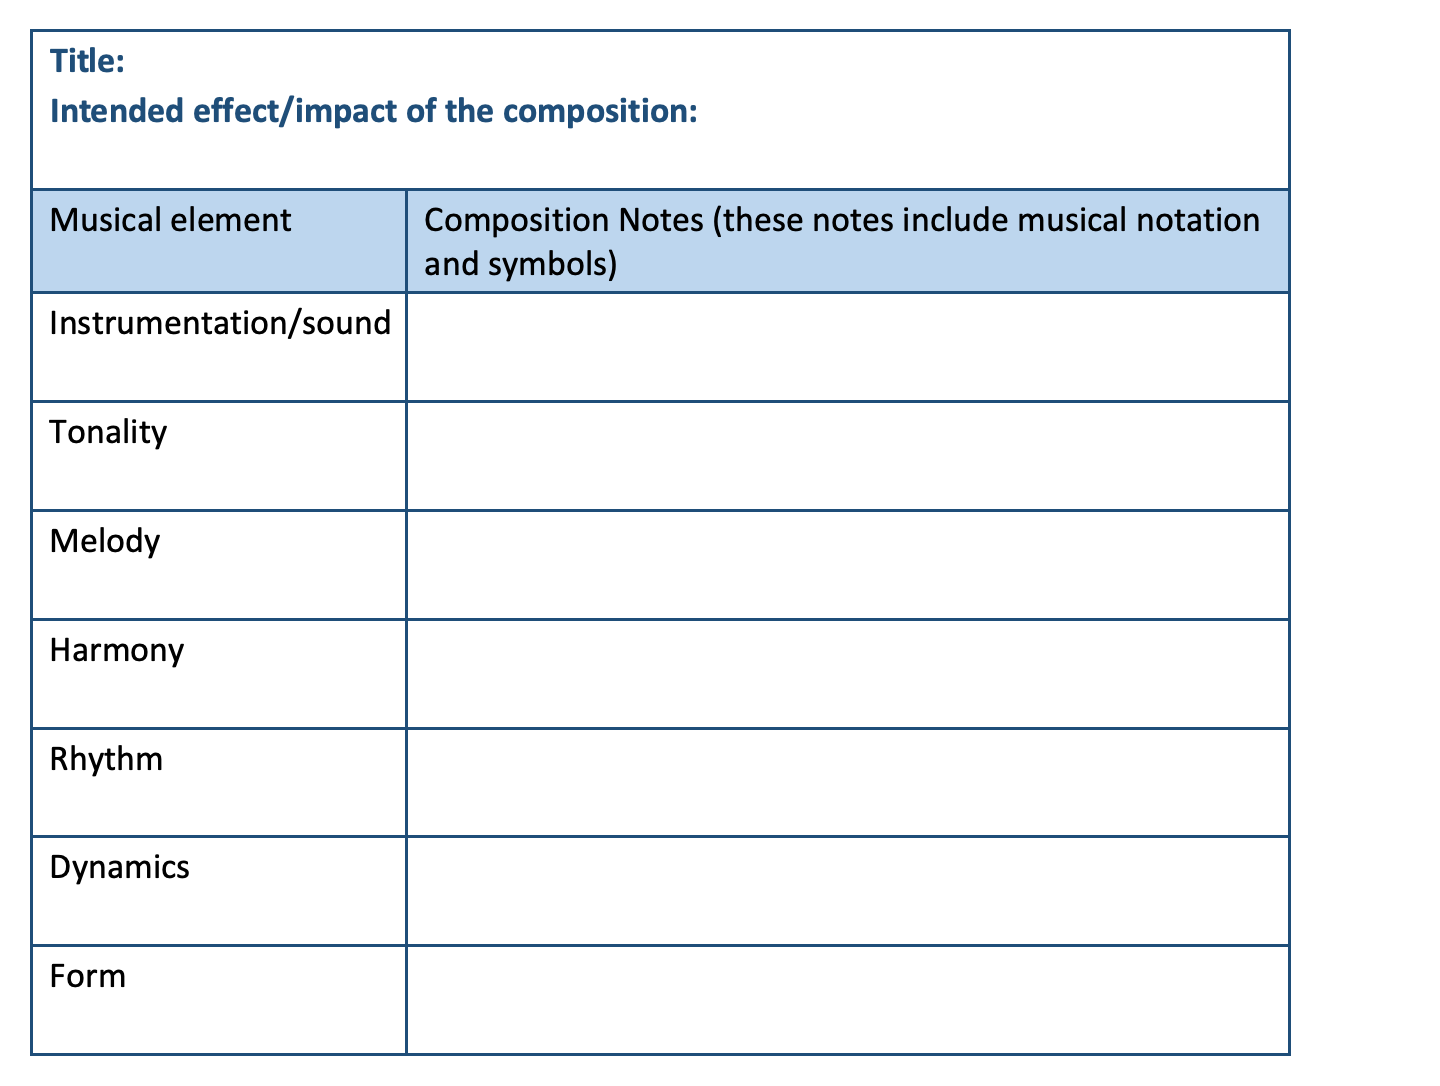 a graphic organiser in table form to help students record their ideas for composition. In the top cell, students should write the title and the Intended effect/impact of the composition. The rest of the table lists musical elements with space for students to write composition notes (which include musical notation and symbols). The musical elements listed are: Instrumentation/sound, Tonality, Melody, Harmony, Rhythm, Dynamics, and Form